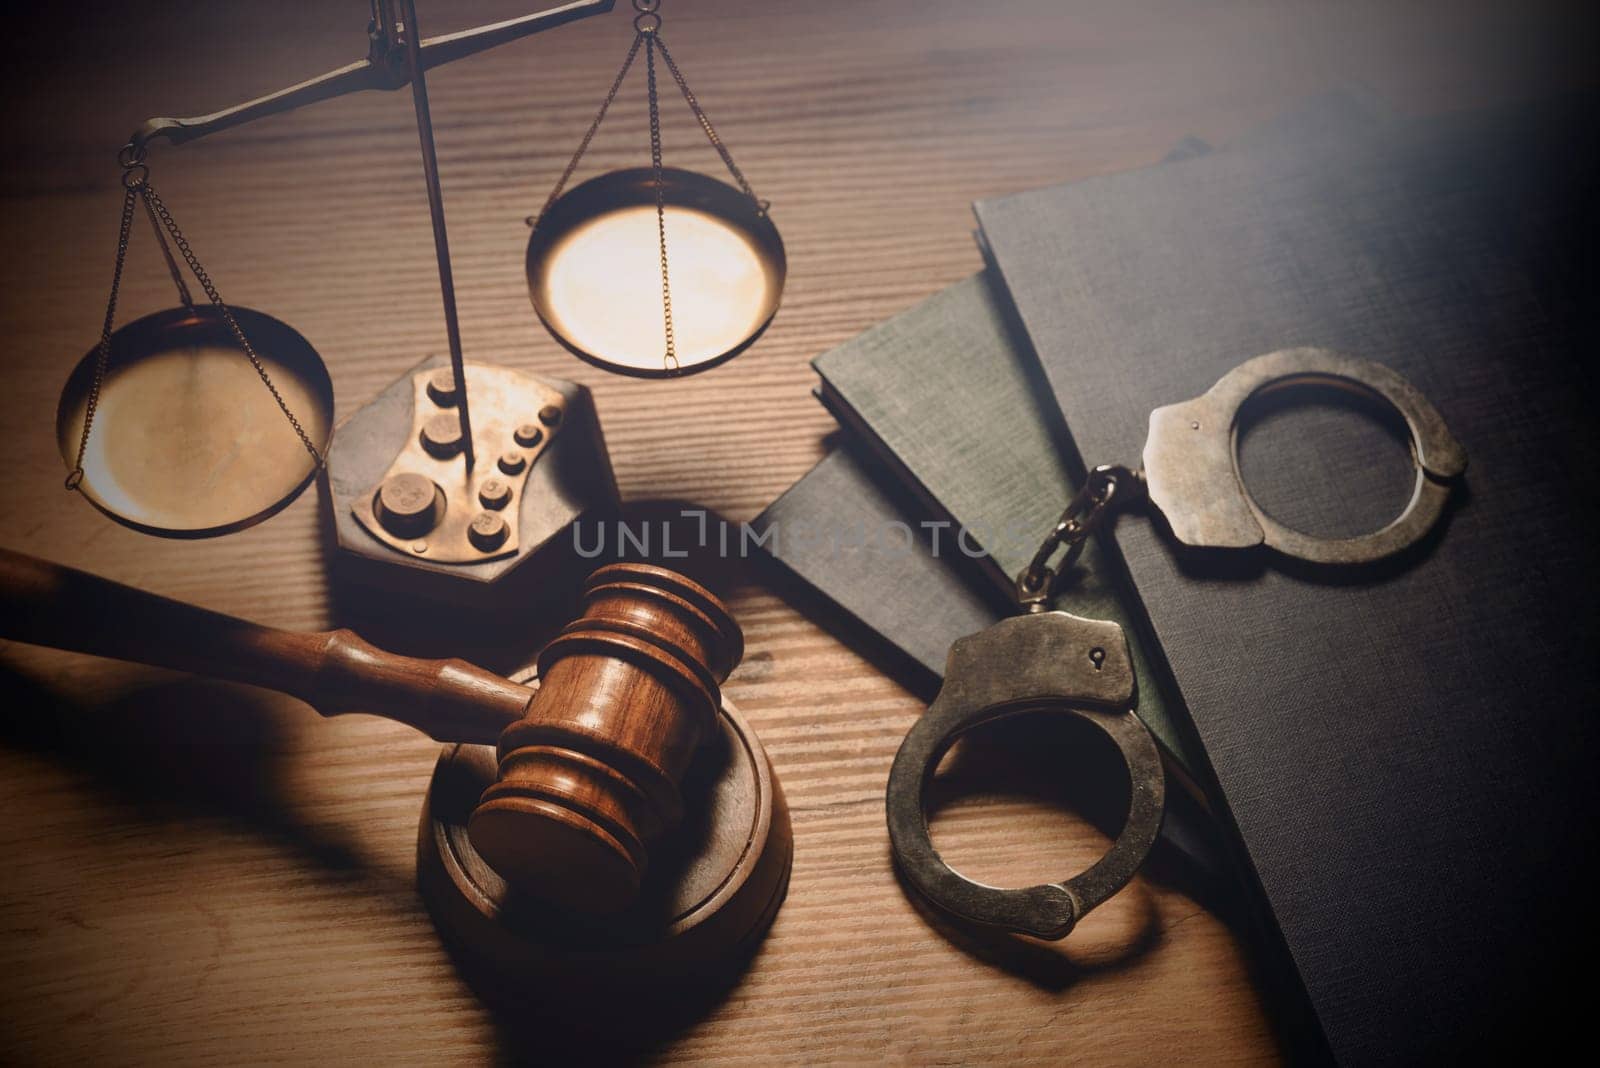 Gavel, weight scale, handcuffs on desk. Law and crime concept